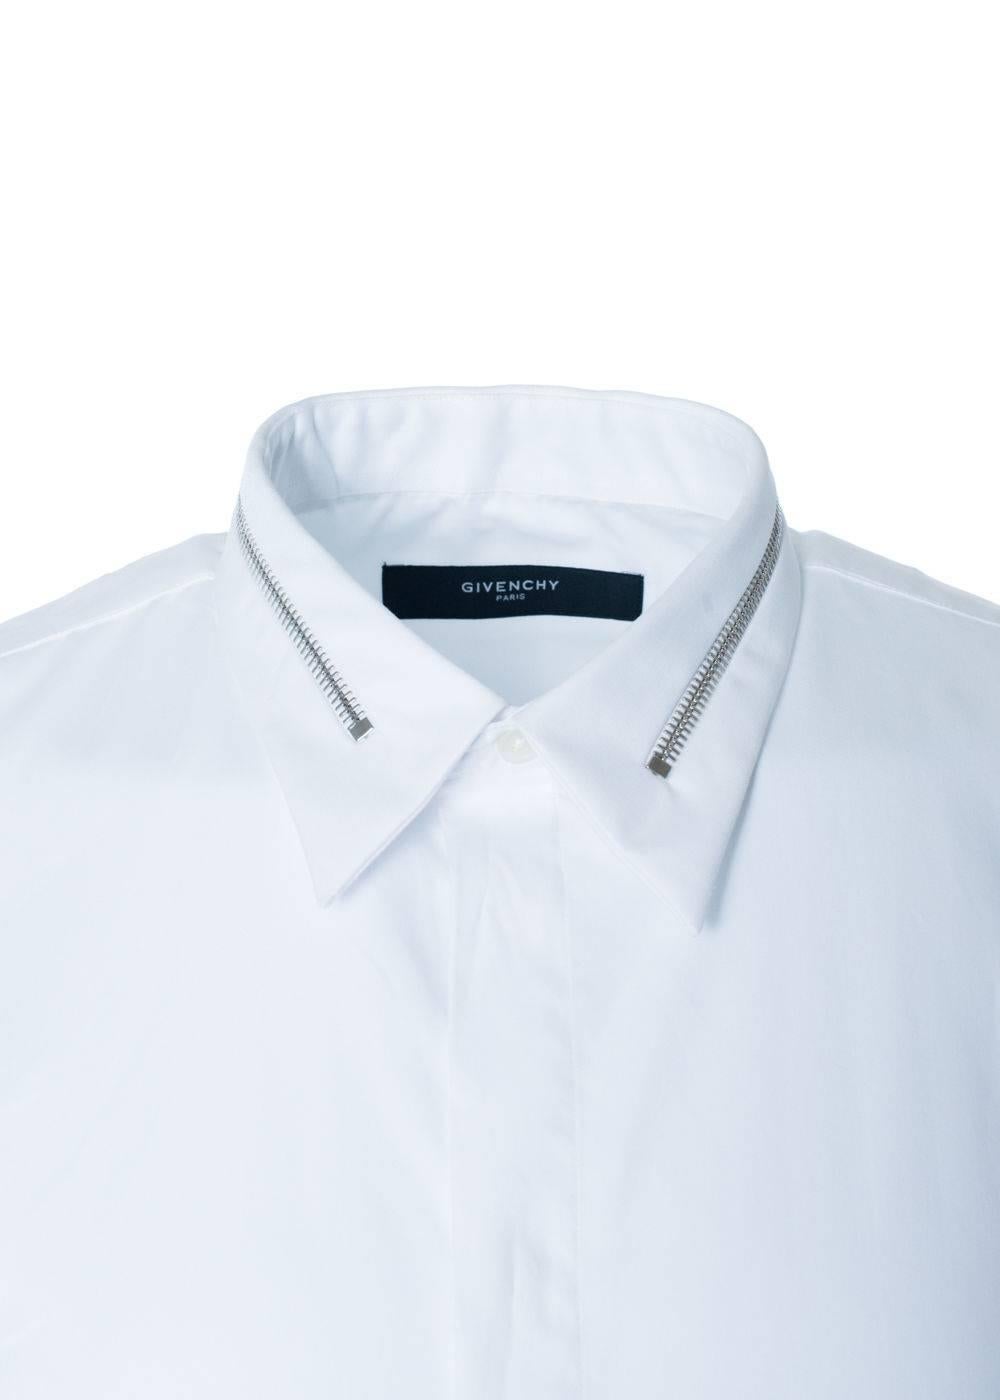 Brand New Givenchy Men's Button Down
Original Tag
Retails in Stores & Online for $565
Men's Size EUR 44 (S) Fits True to Size

Classic white button down silhouette from fashion house Givenchy with a slight twist in this classic style. The top is